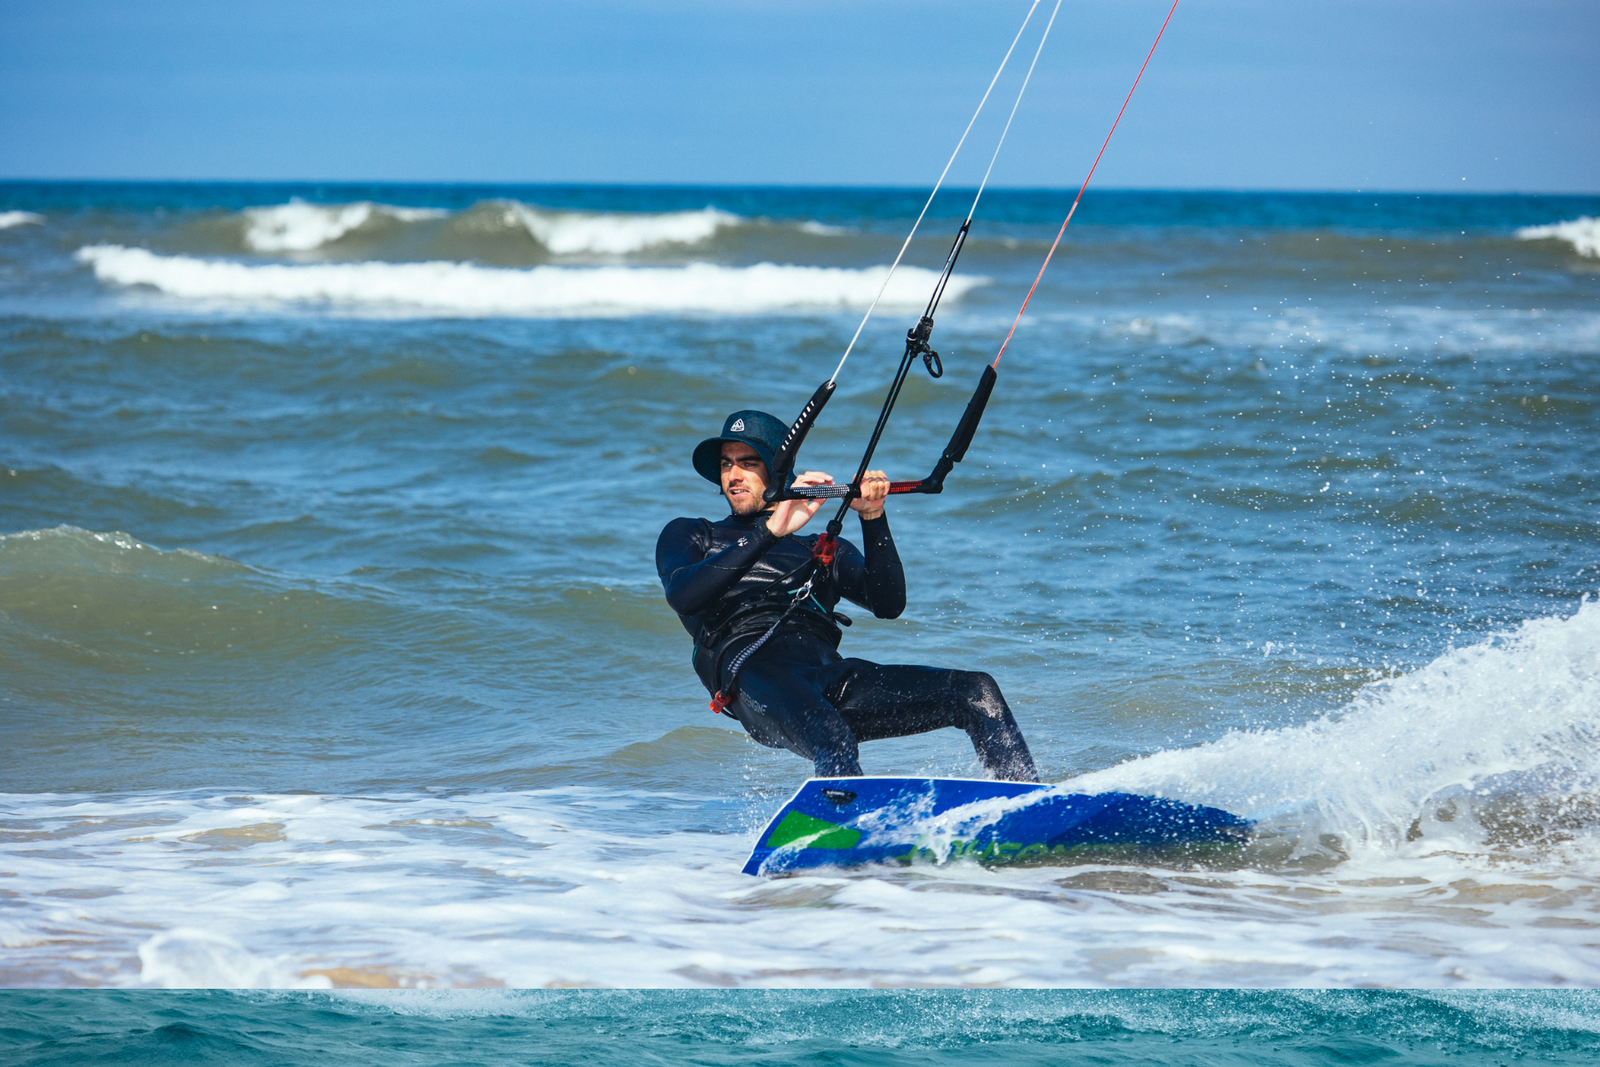 How to get started in kiteboarding – A beginner's guide